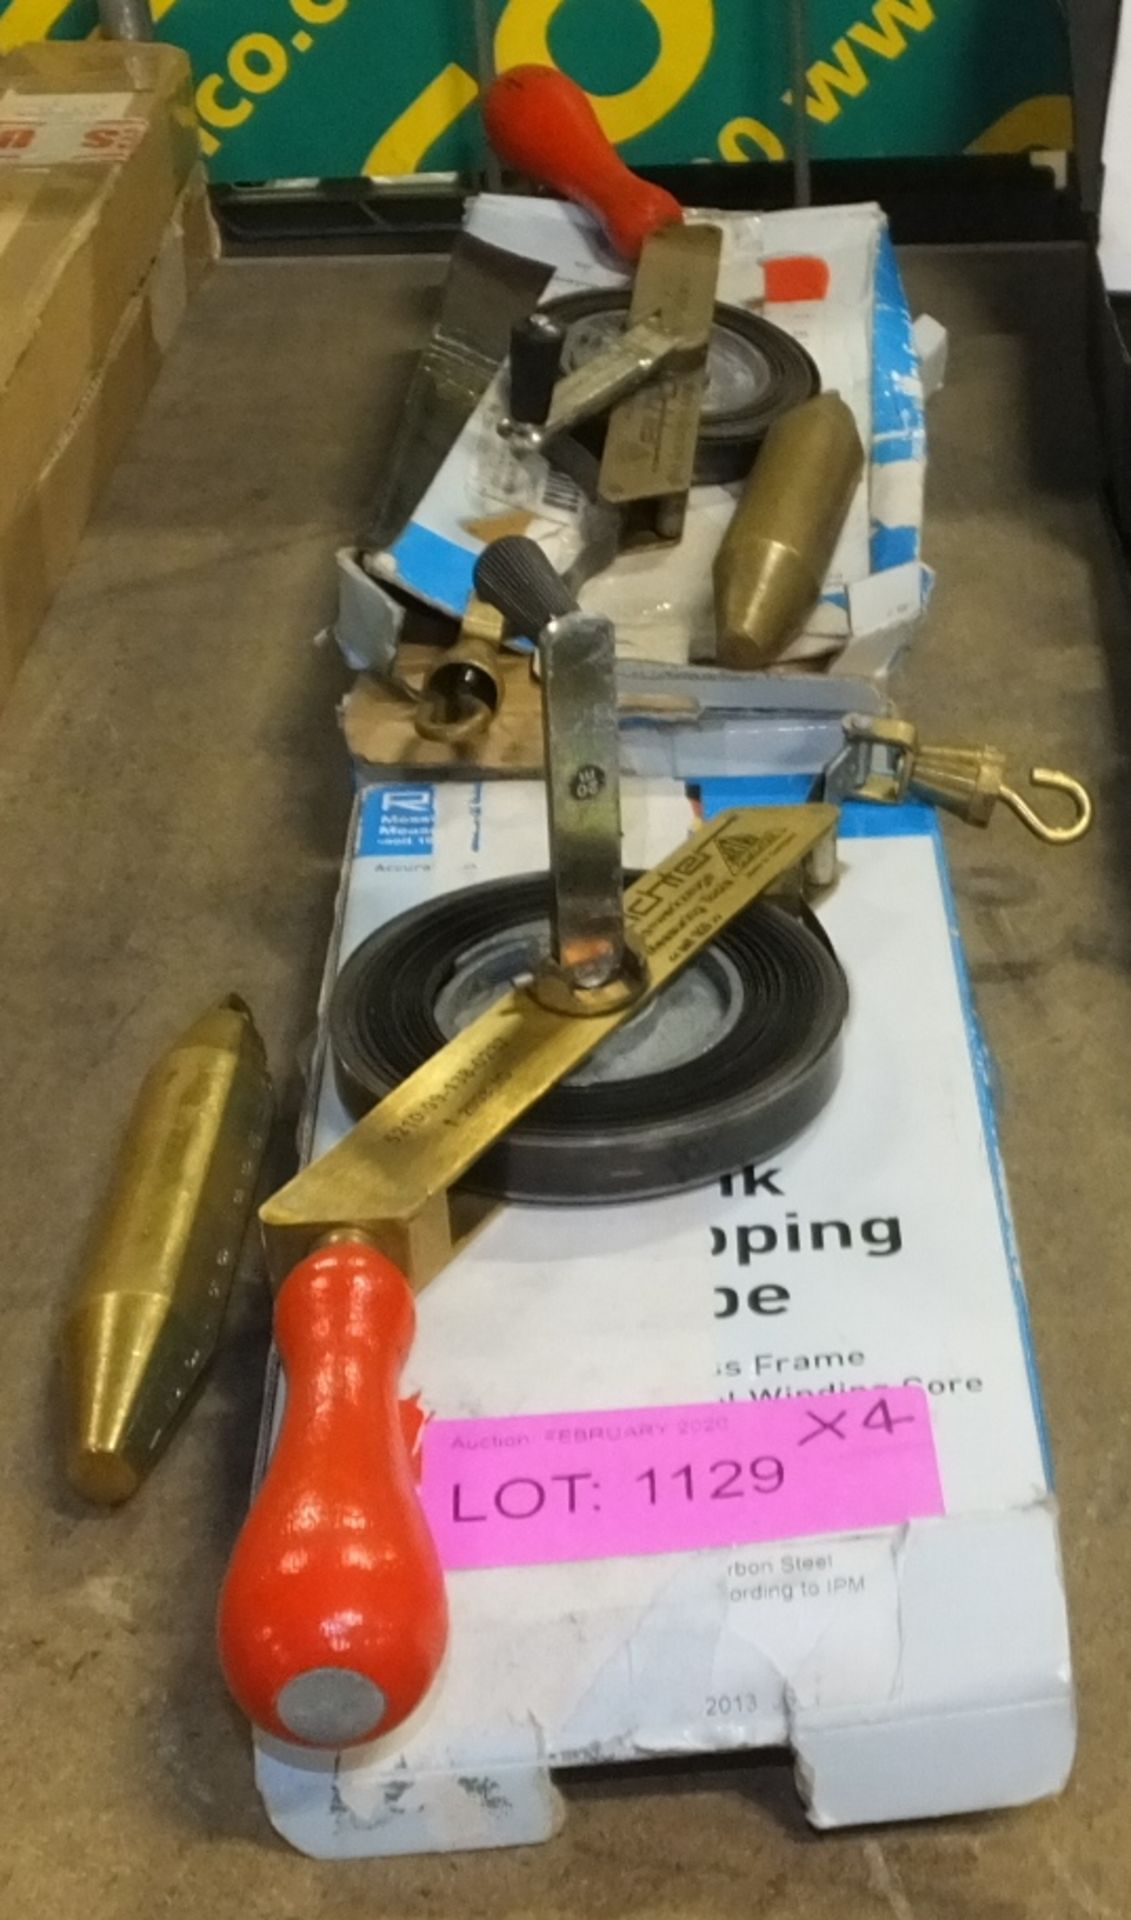 4x Richter Tank Dipping/Depth Measuring Tapes with Brass Weights.